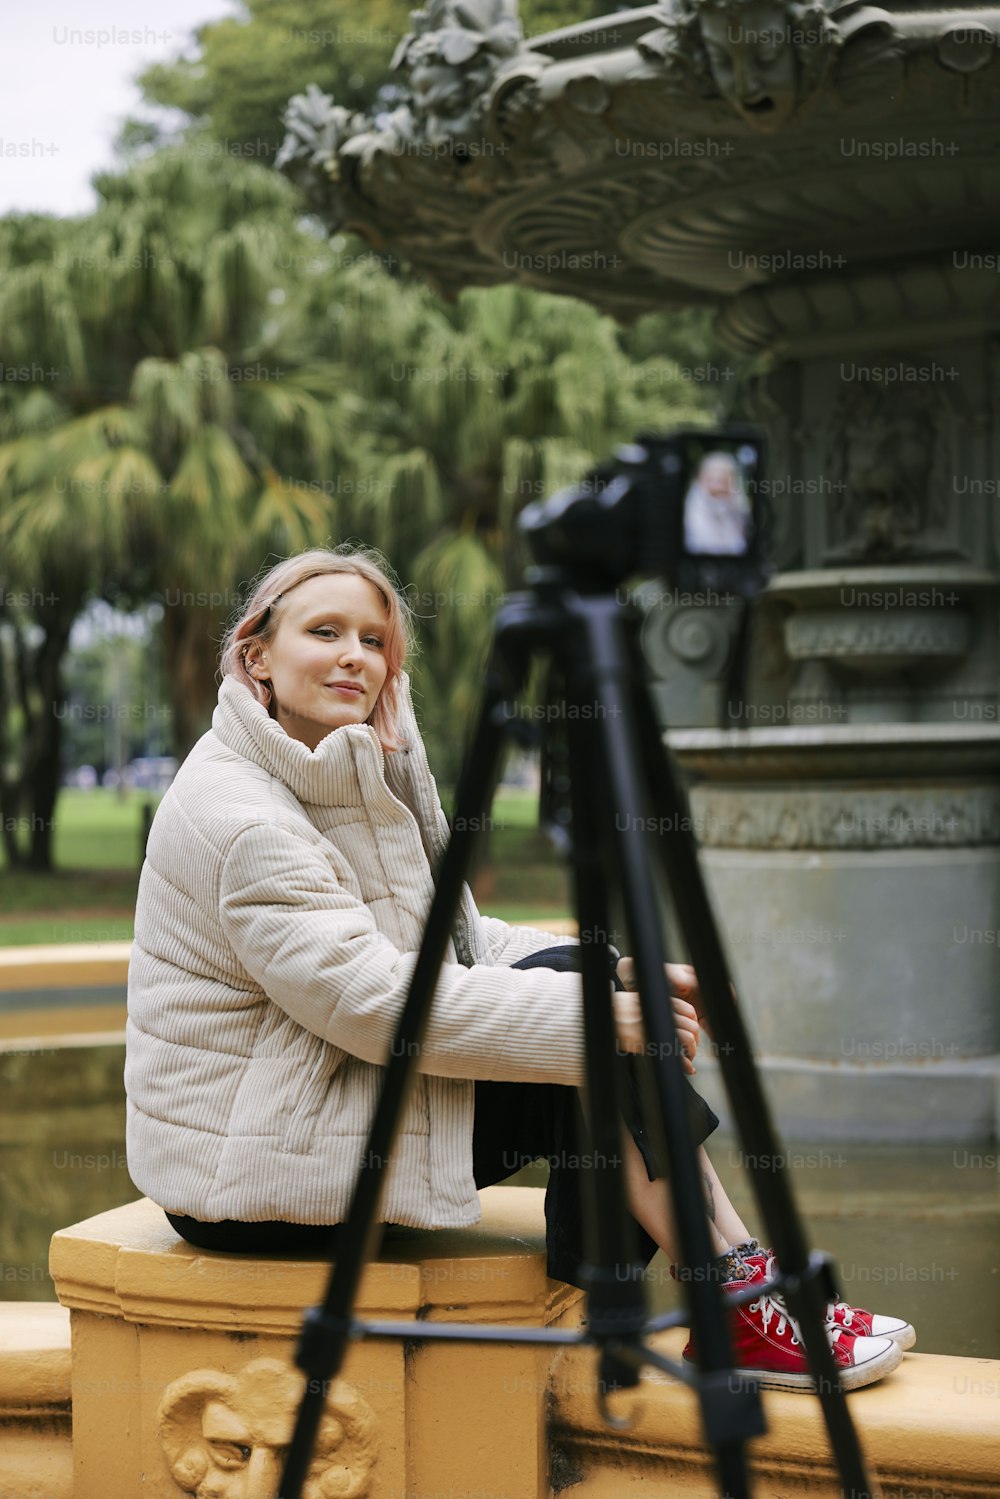 a woman is sitting on a bench with a camera